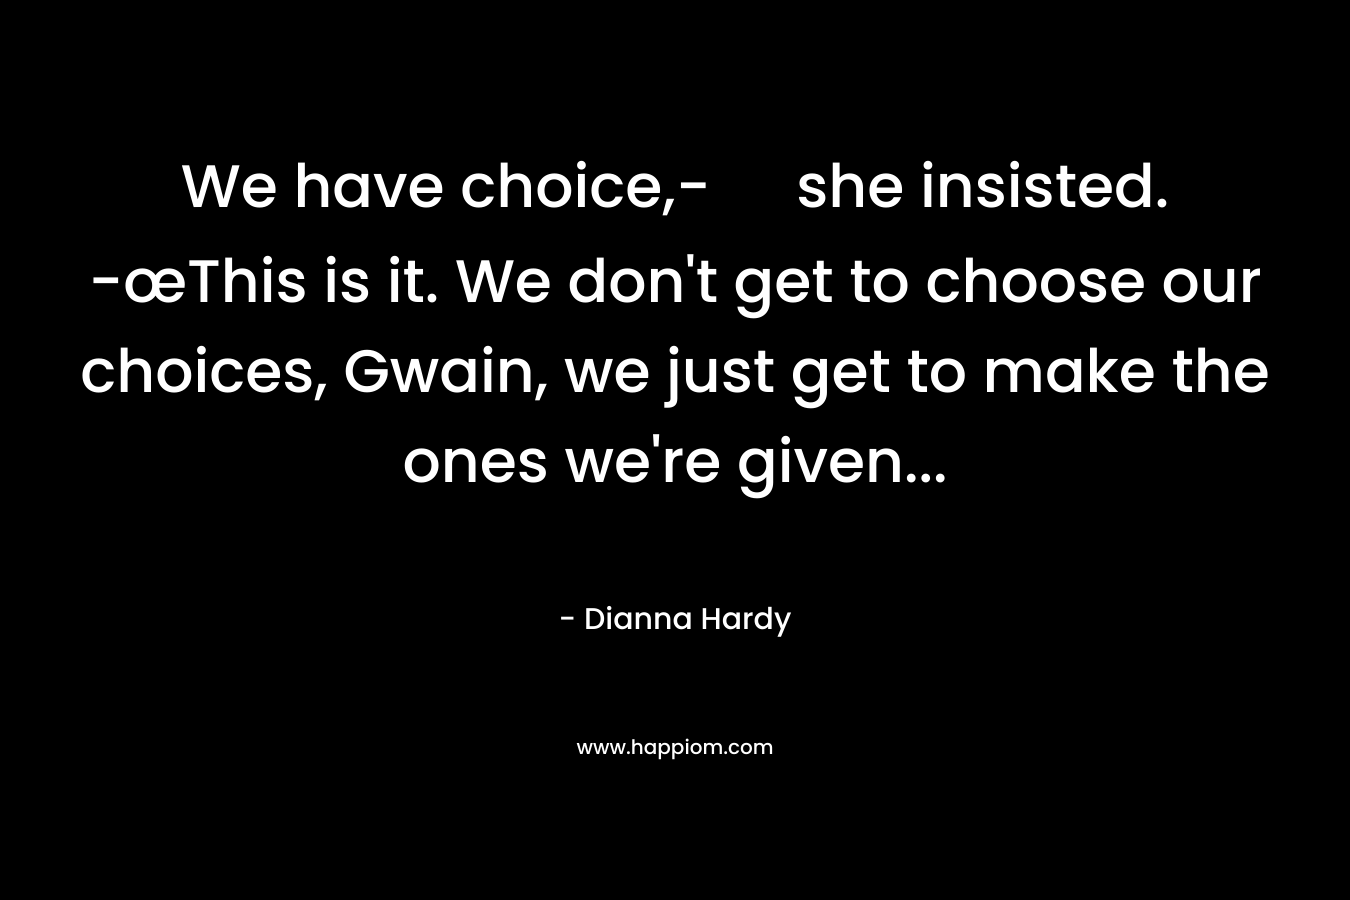 We have choice,- she insisted. -œThis is it. We don't get to choose our choices, Gwain, we just get to make the ones we're given...